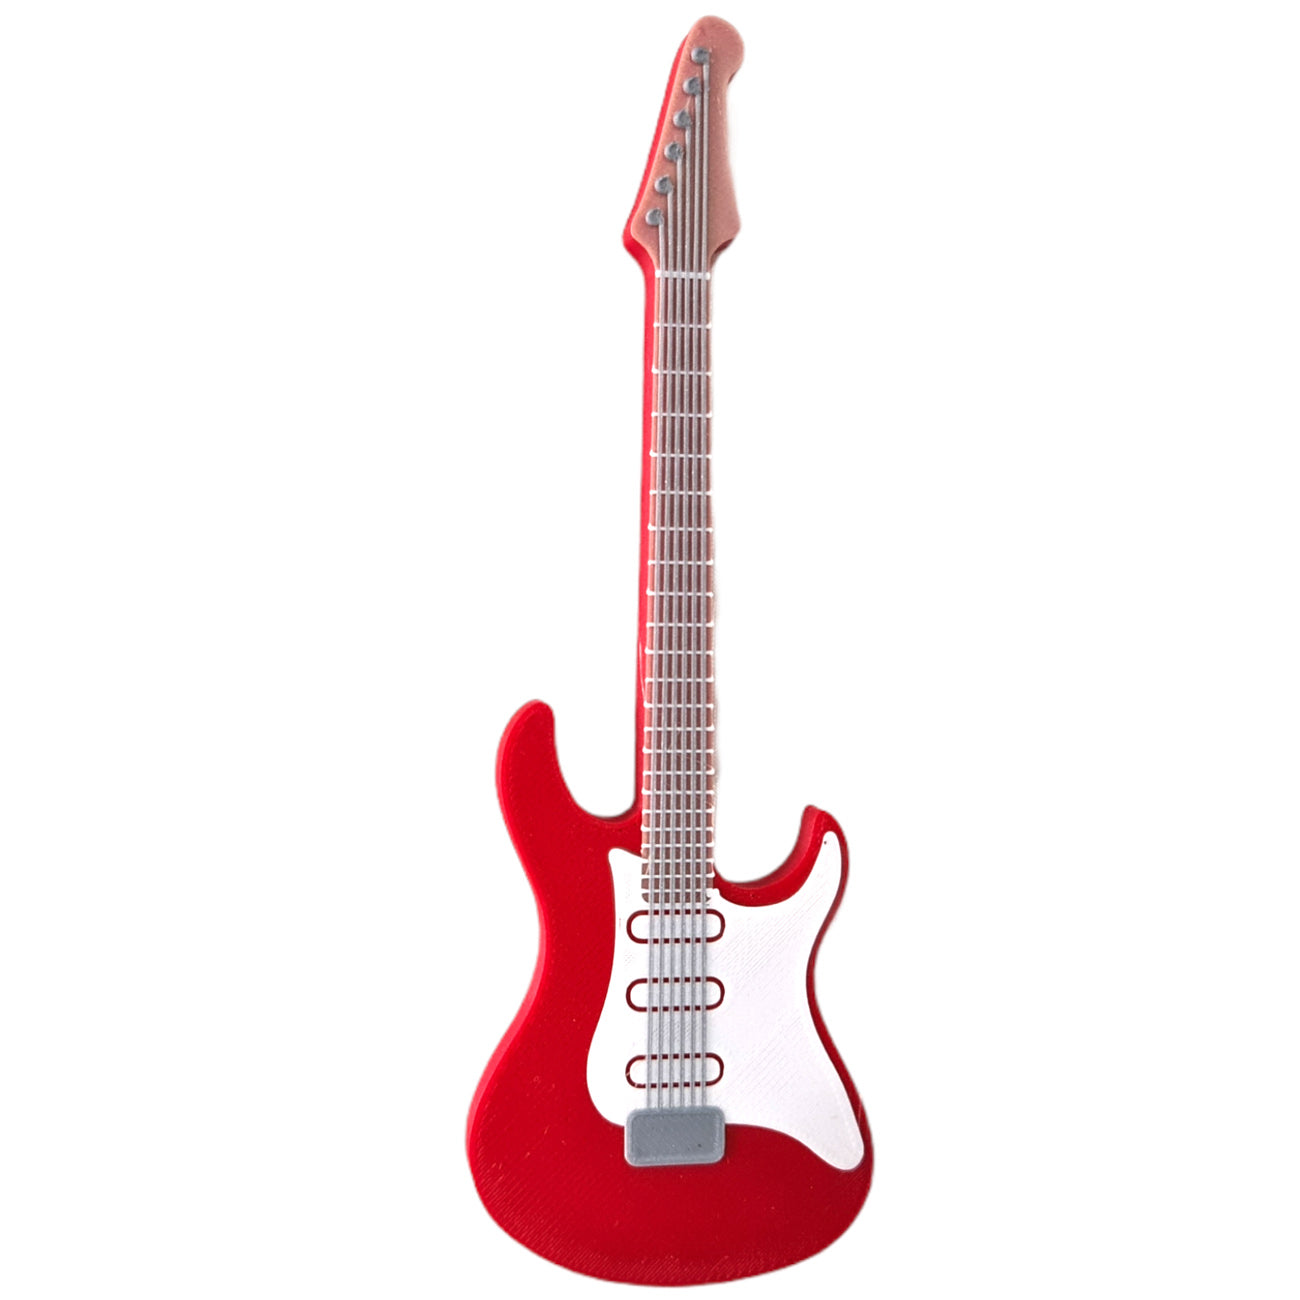 Elf red and white electric guitar